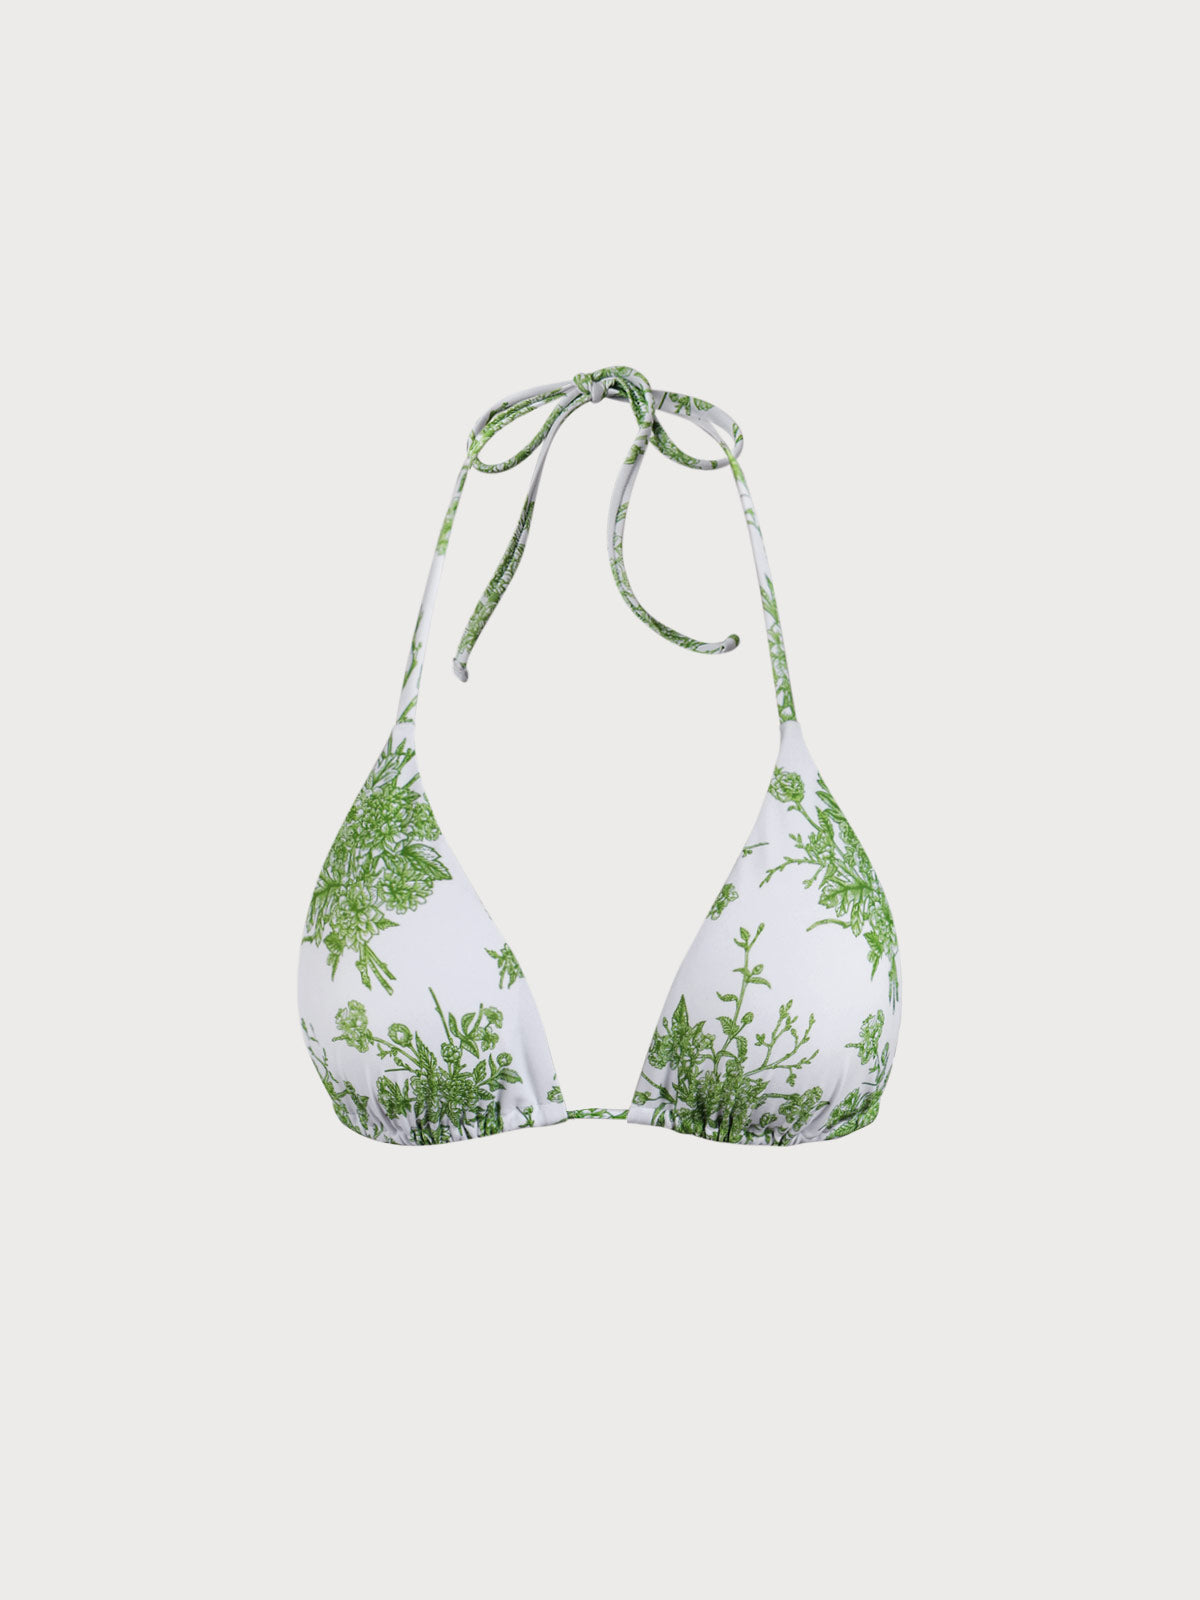  Women's Plus Size Soft Two Piece Halter Padded Top Tie Side  Bottom Triangle Bikini Bathing Suit Plants Leaves and Foliage Floral  Comfortable Bikini Set for Women Beach Sea XL : Clothing